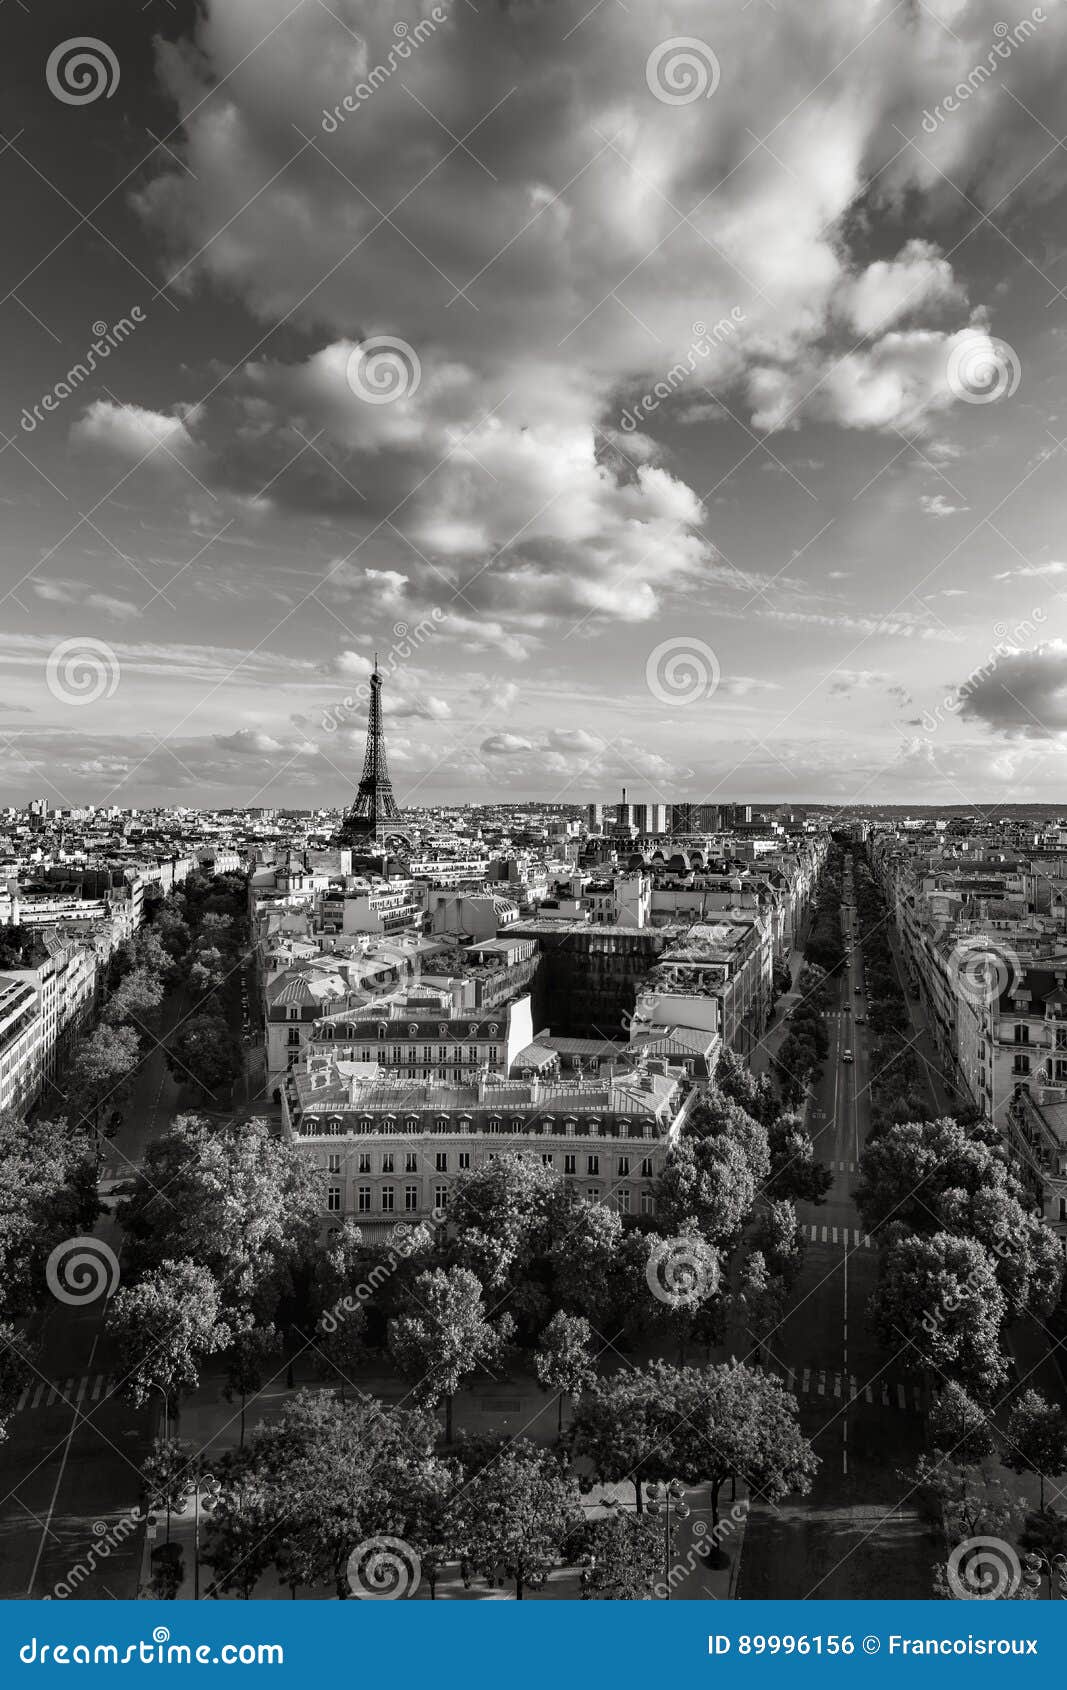 eiffel tower and paris avenues in black & white. france